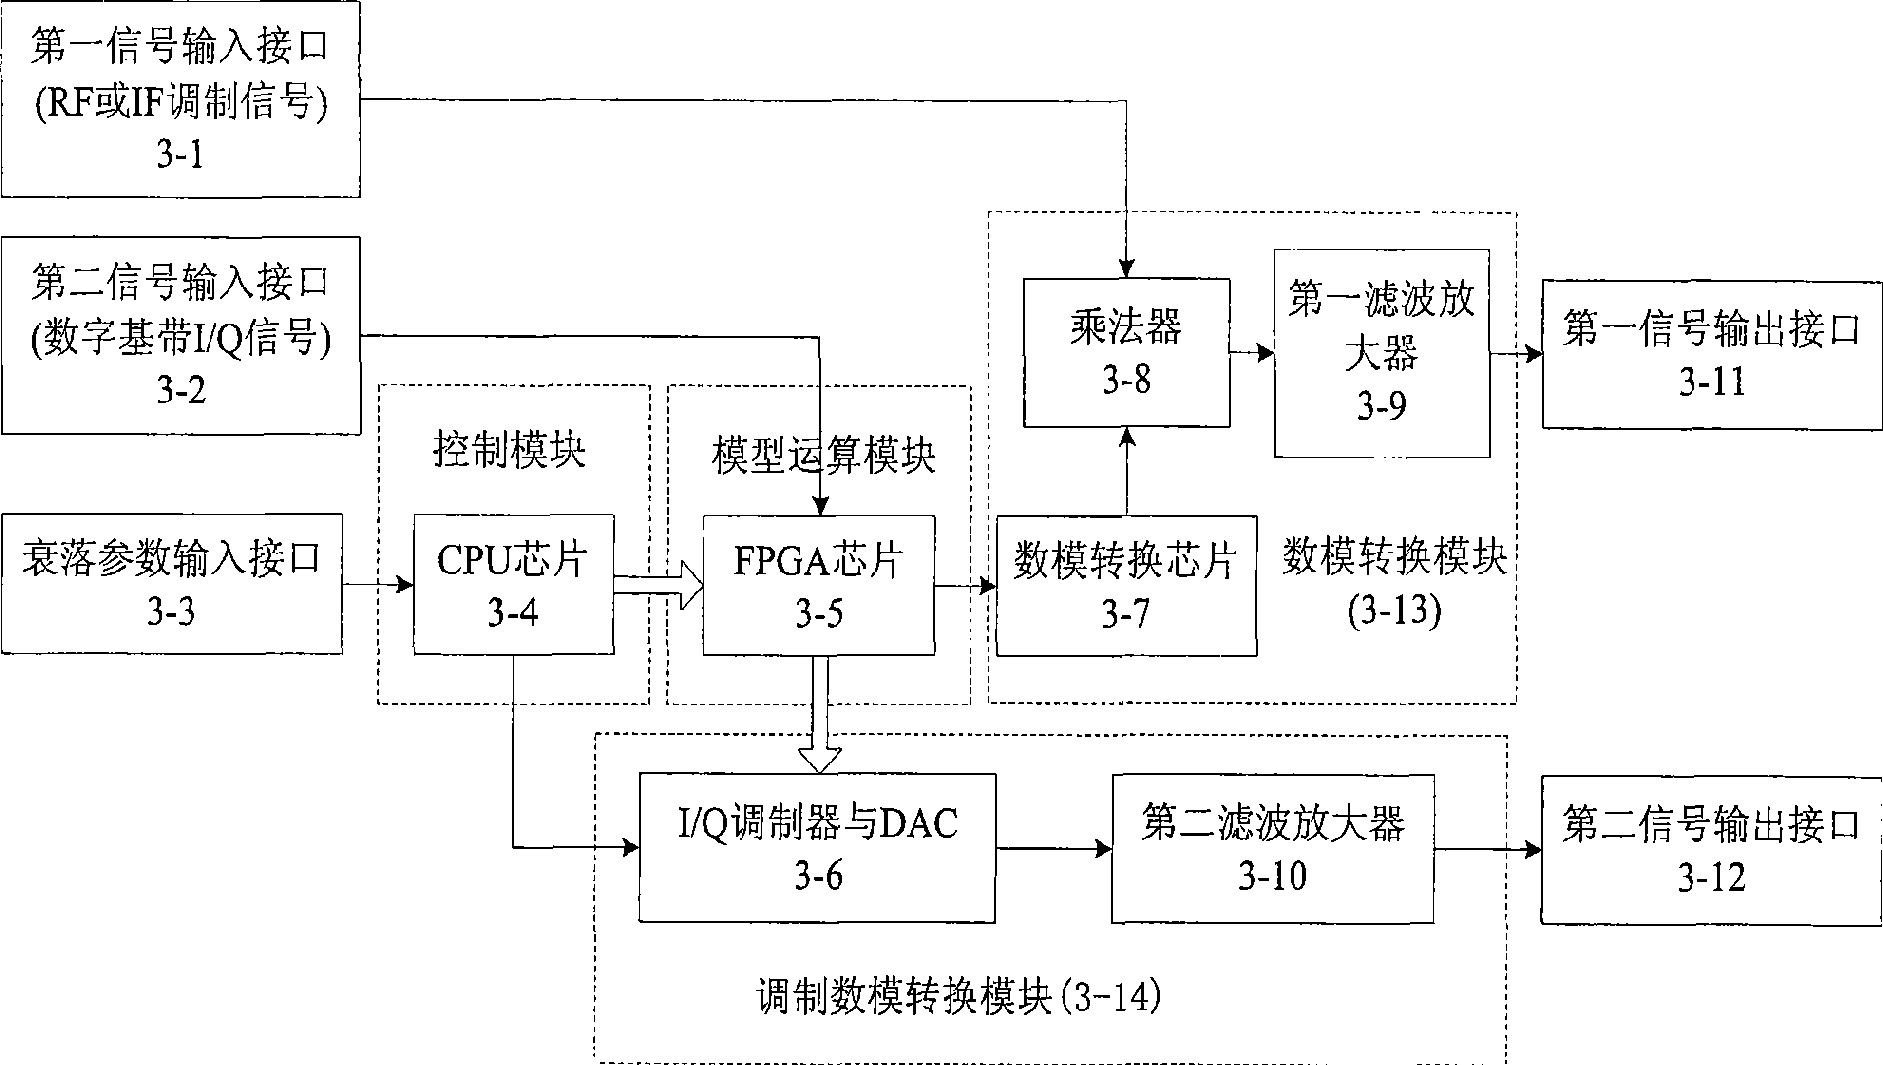 Wireless fading channel simulation system and method based on spreading Suzuki model